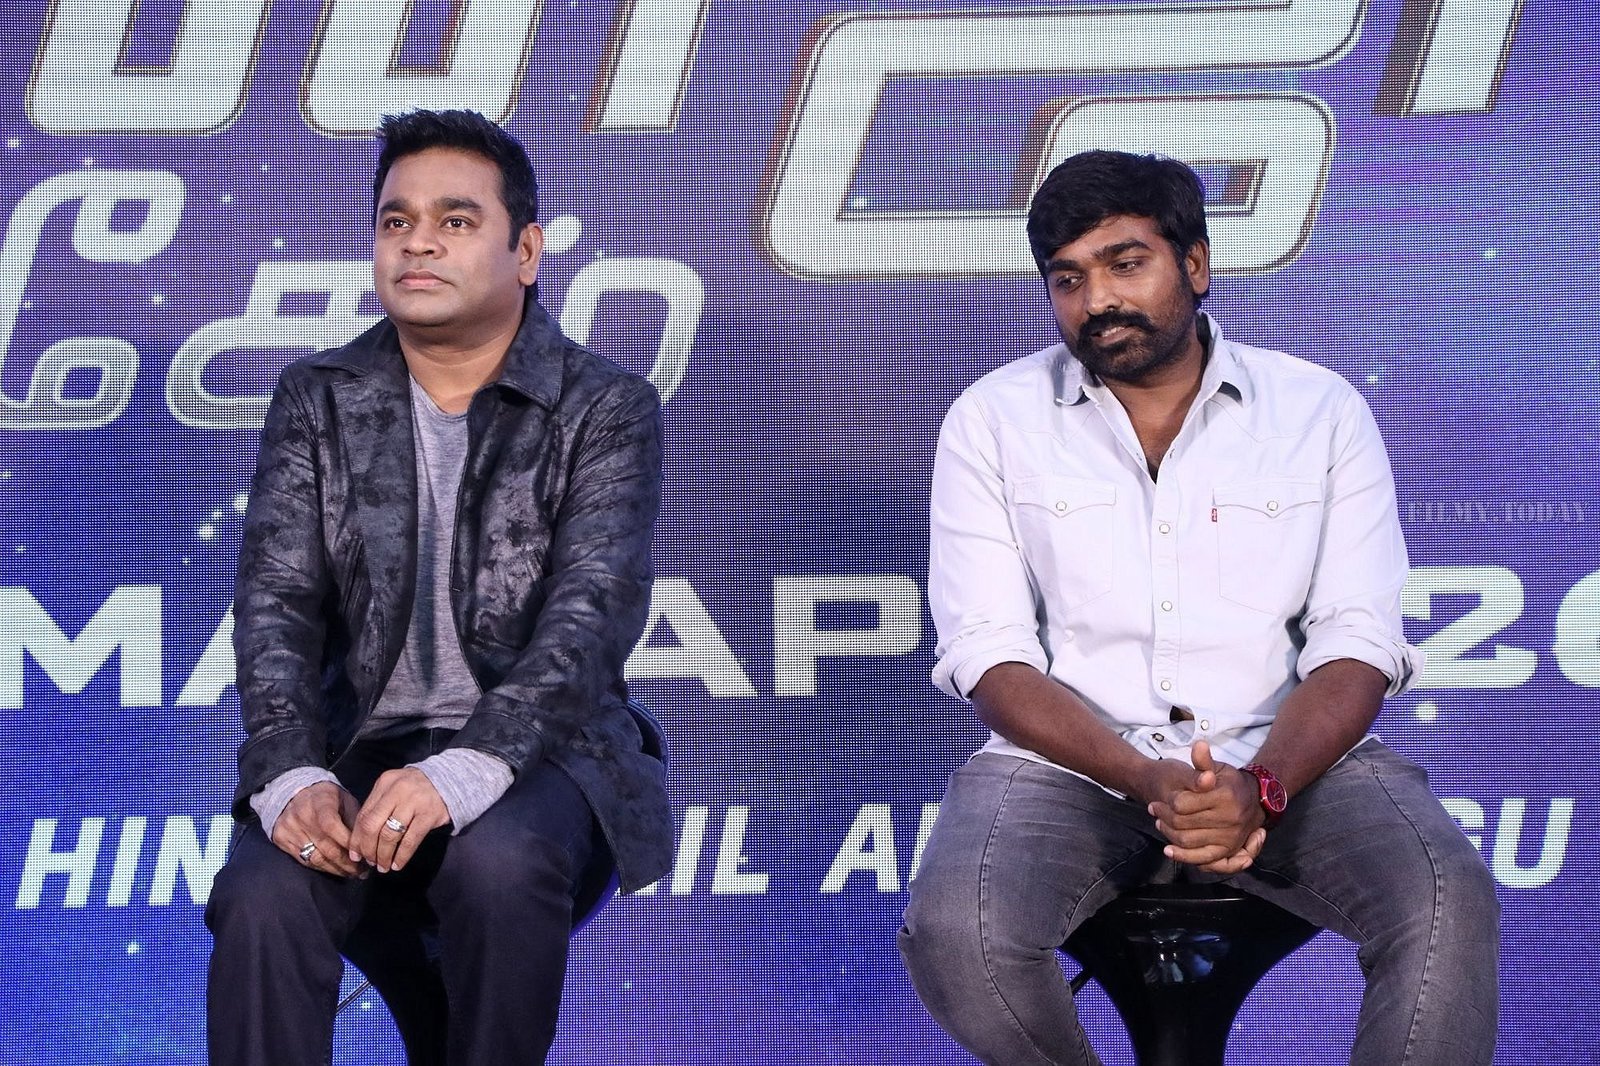 Avengers End Game Tamil Version Press Meet Photos | Picture 1641687